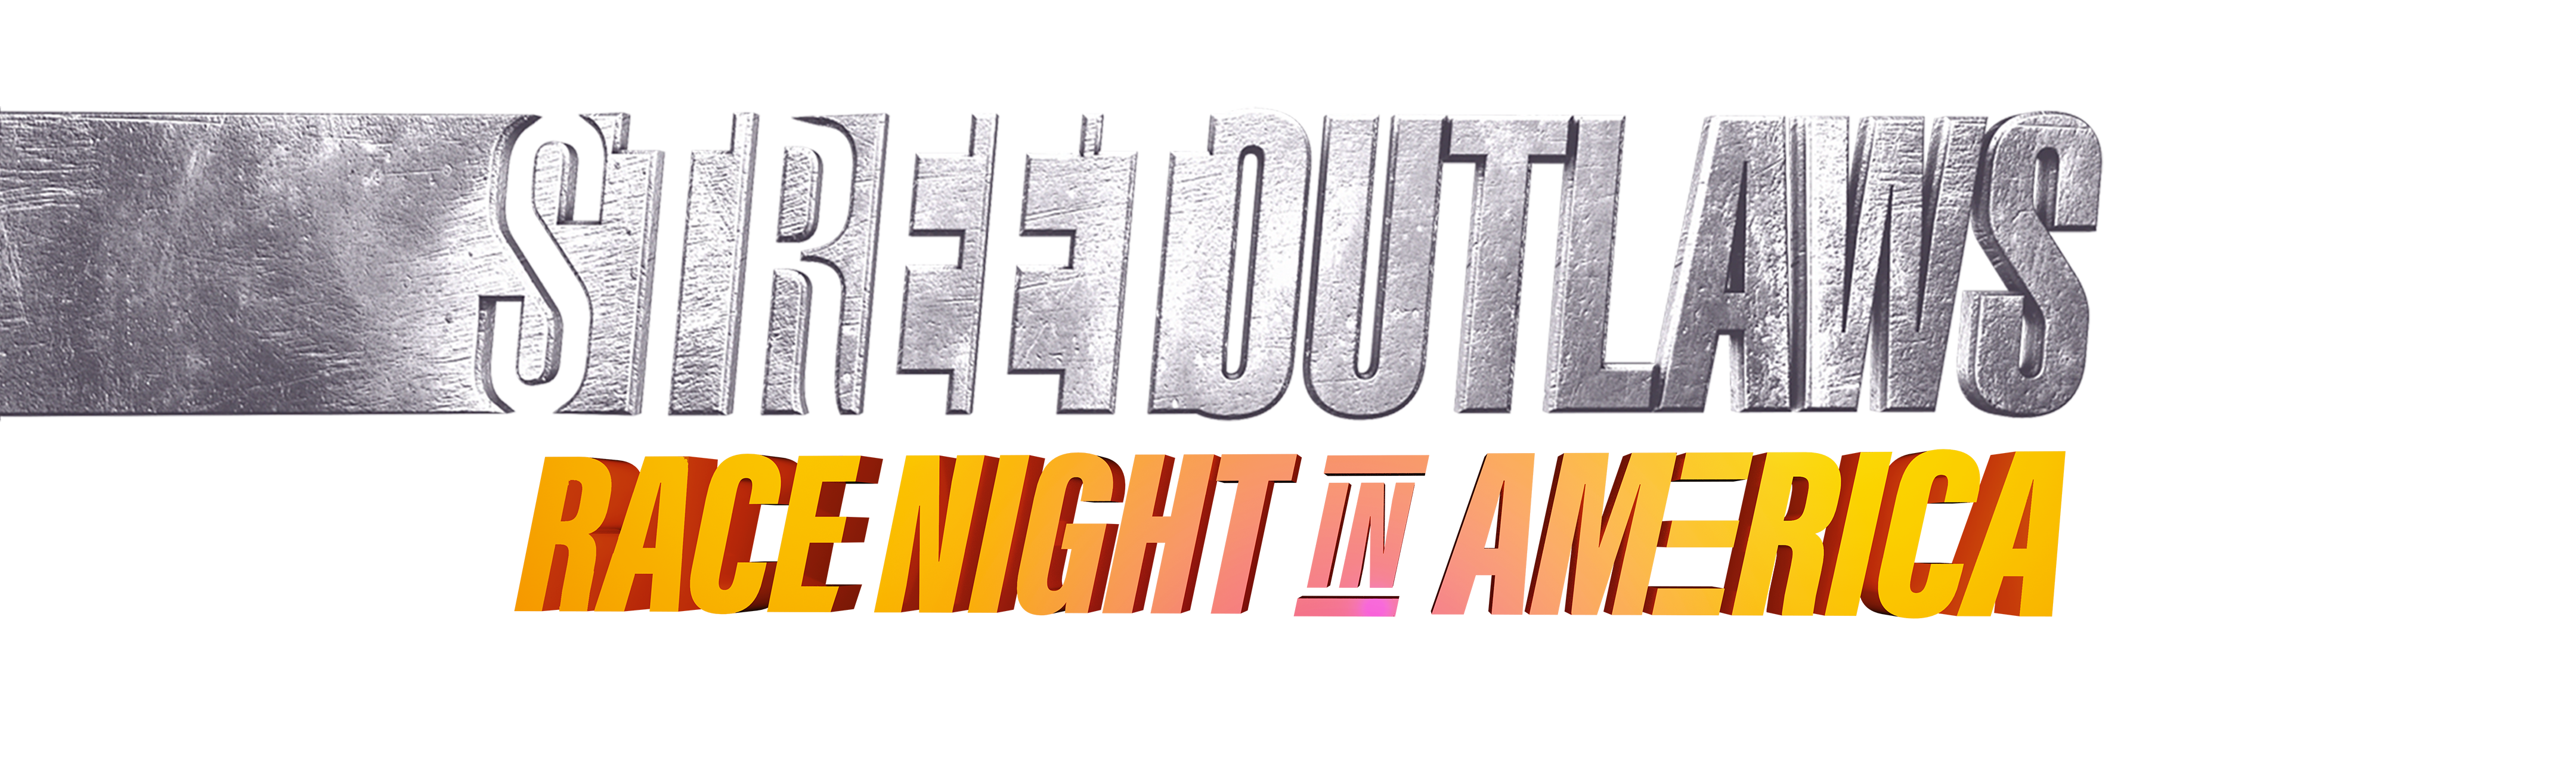 STREET OUTLAWS: RACE NIGHT IN AMERICA